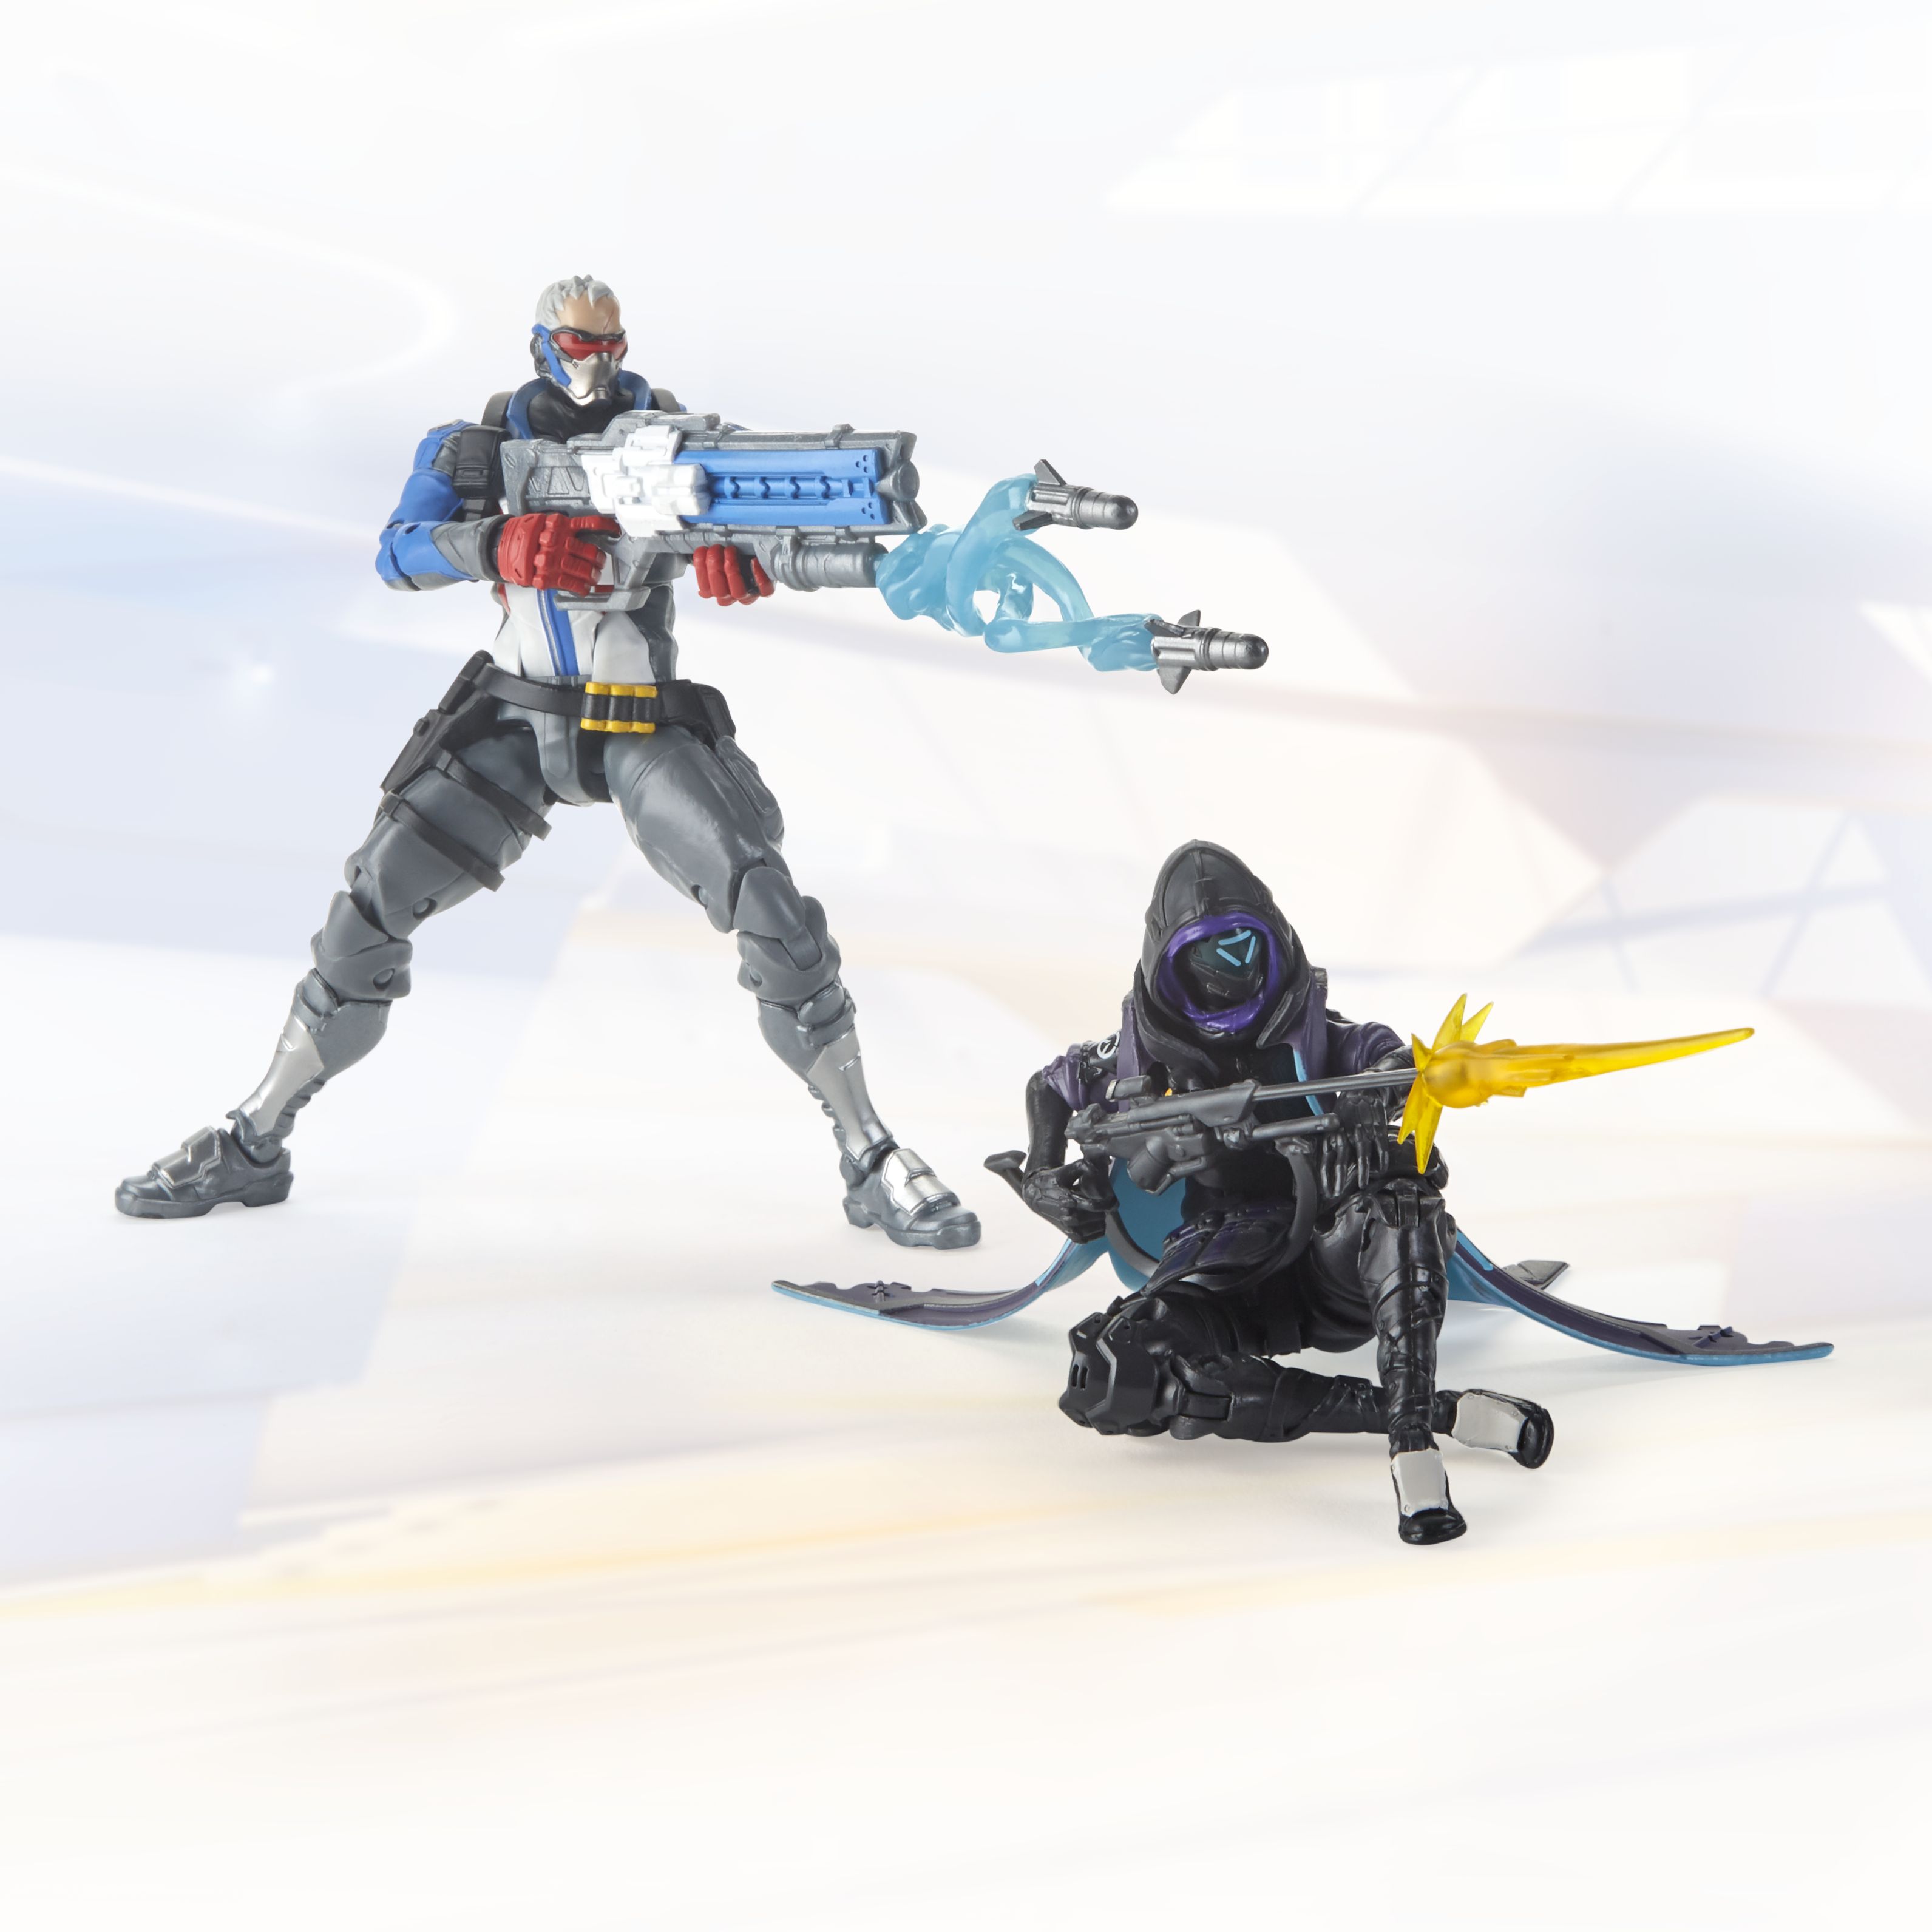 Soldier 76 and Ana